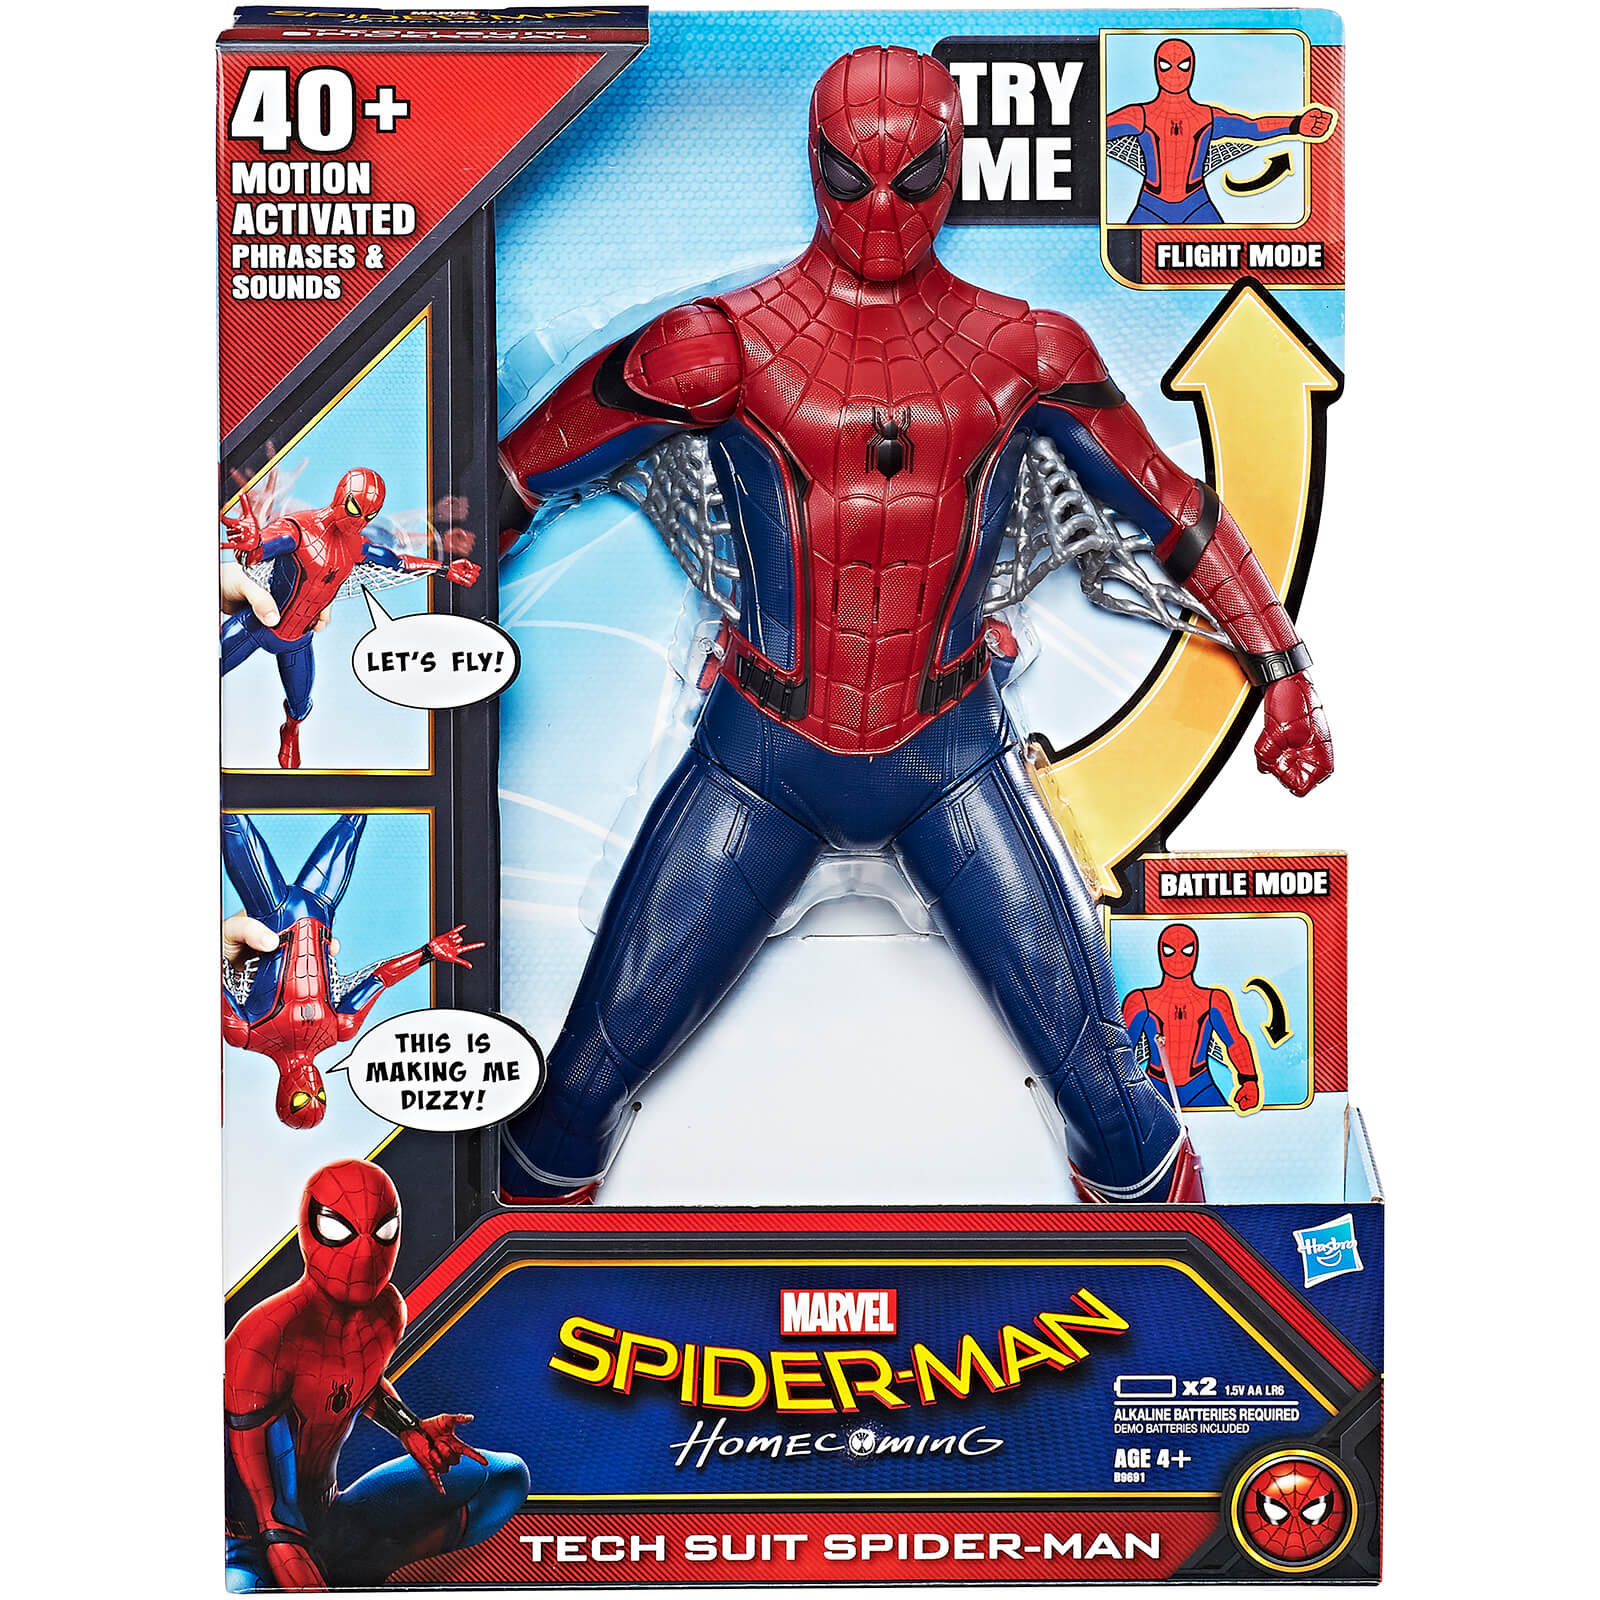 Marvel Spider-Man: Homecoming Tech Suit Spider-Man Action Figure - 11482293 1174501908962871